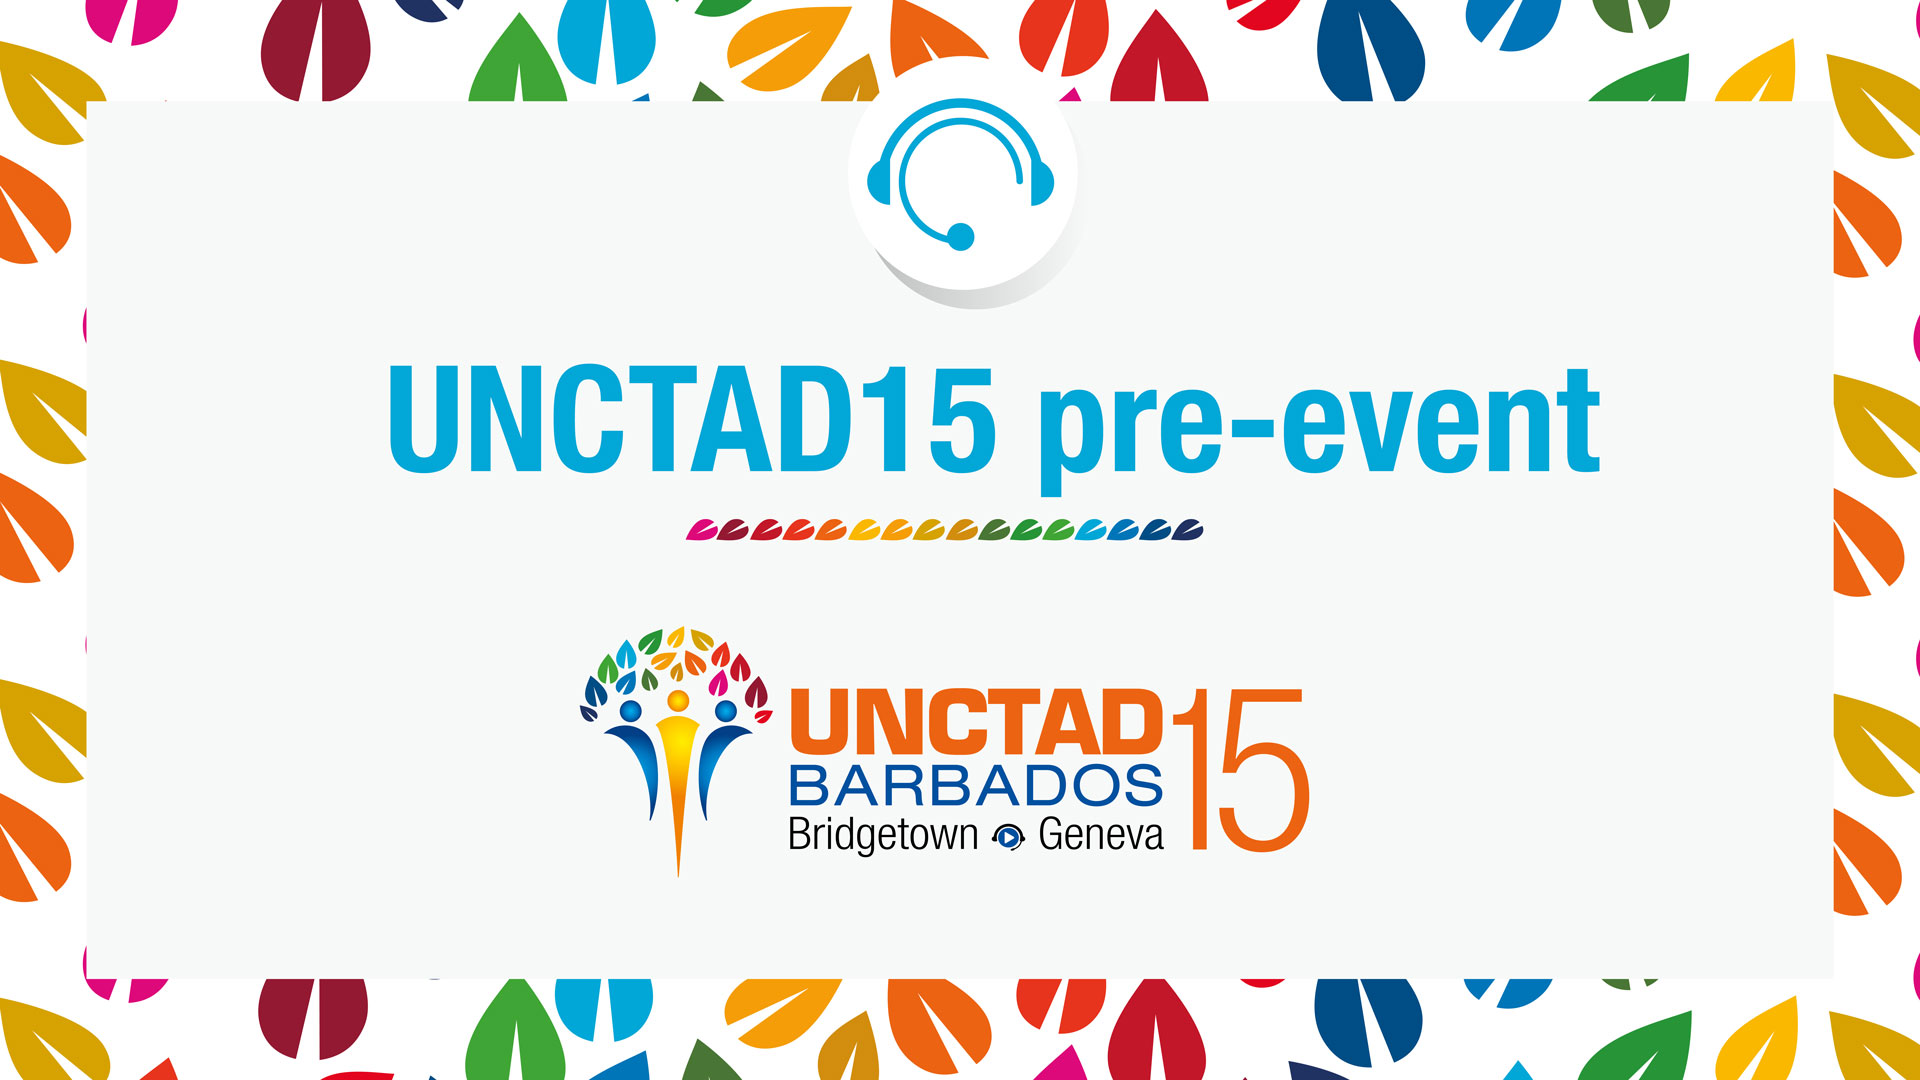 UNCTAD15 pre-event: COVID-19 and challenges for financing for development